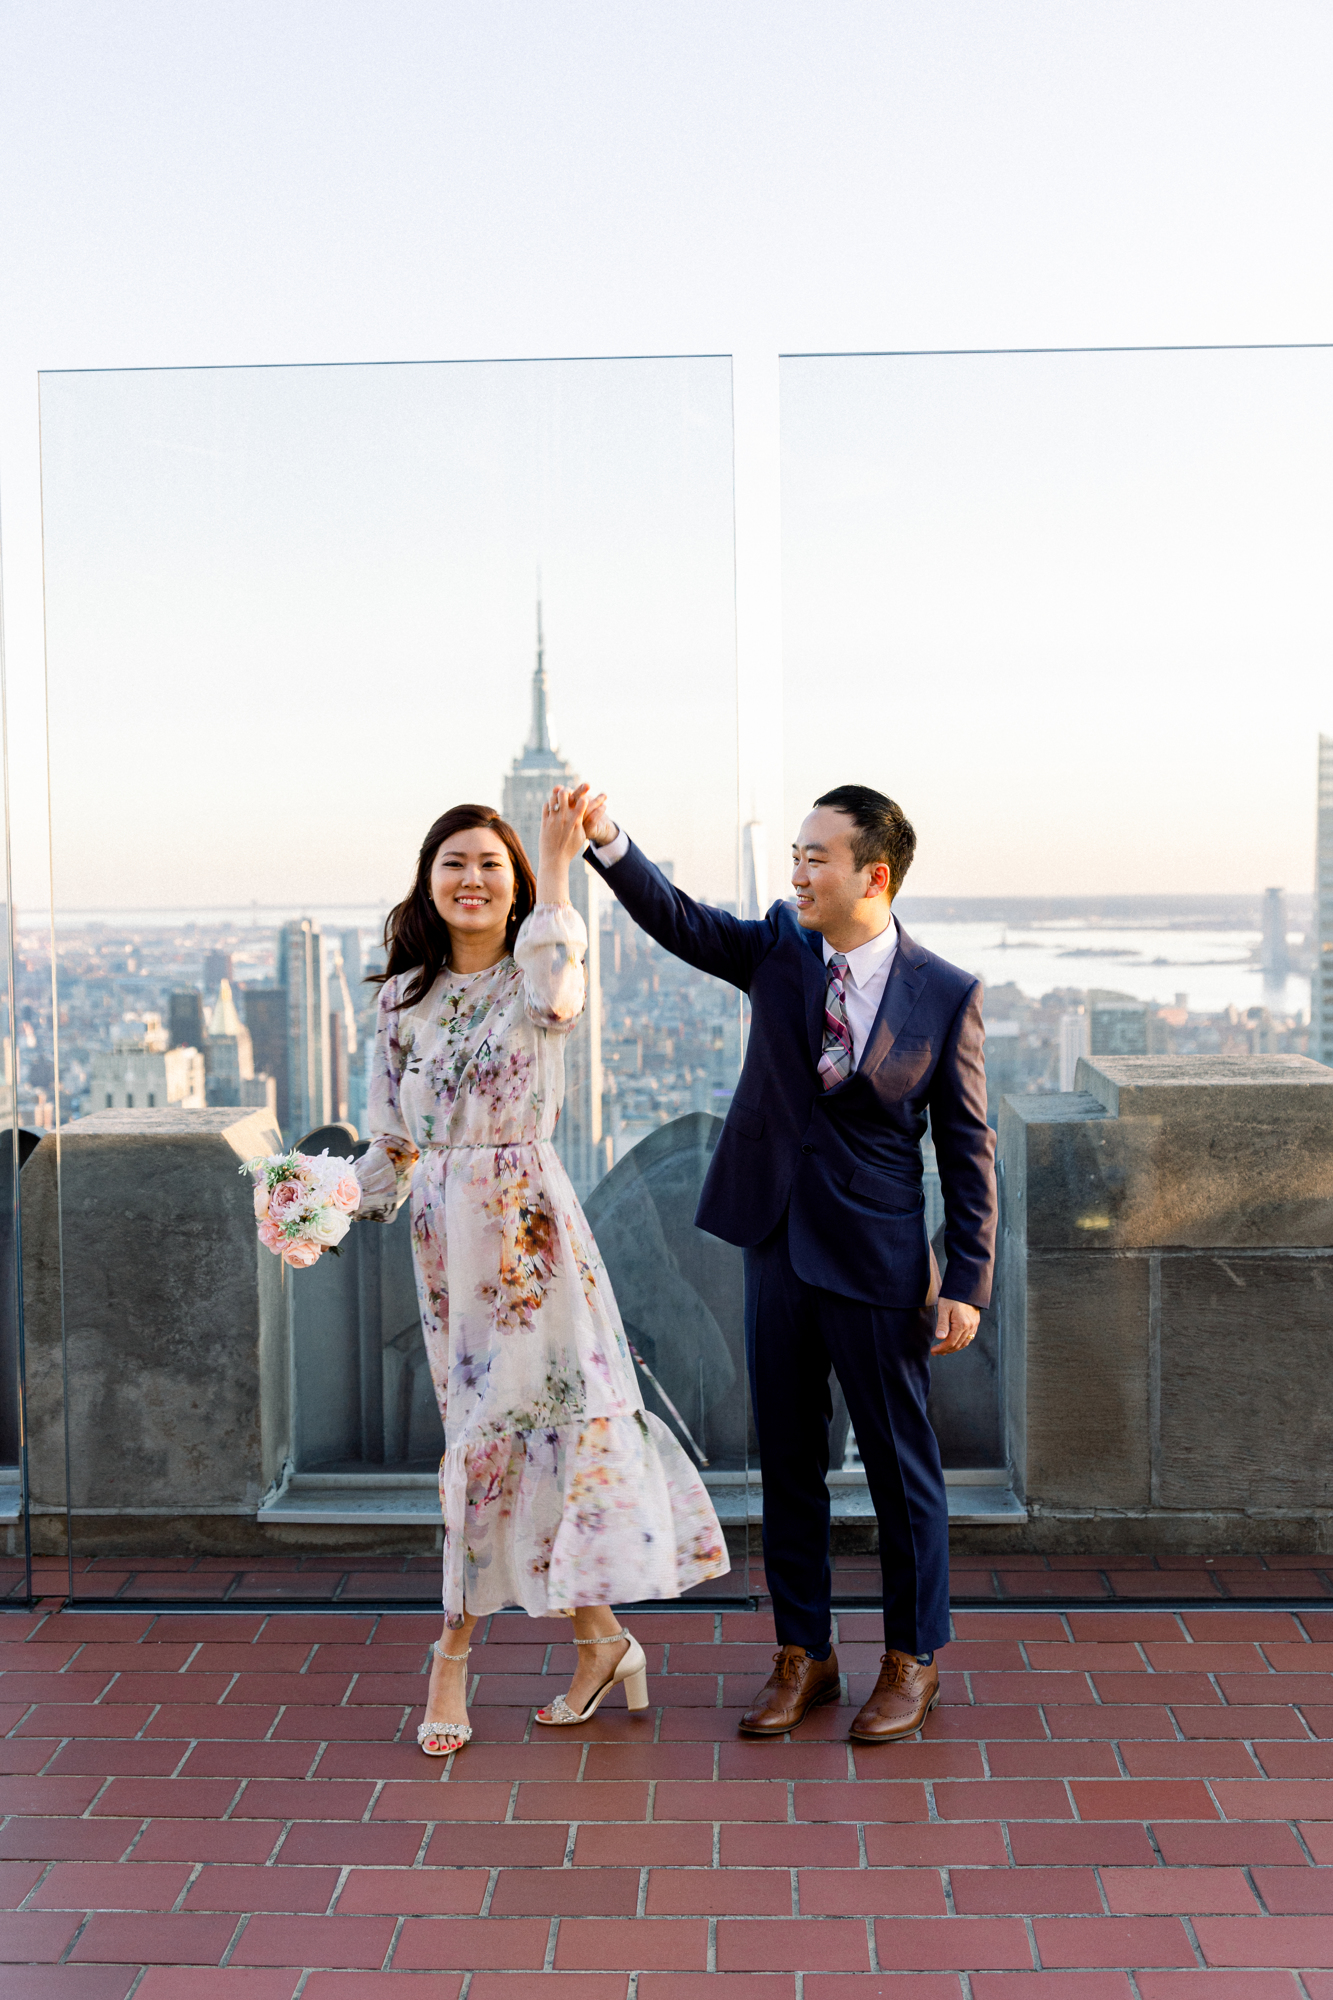 Playful Top of the Rock Engagement Photography at Sunset in NYC